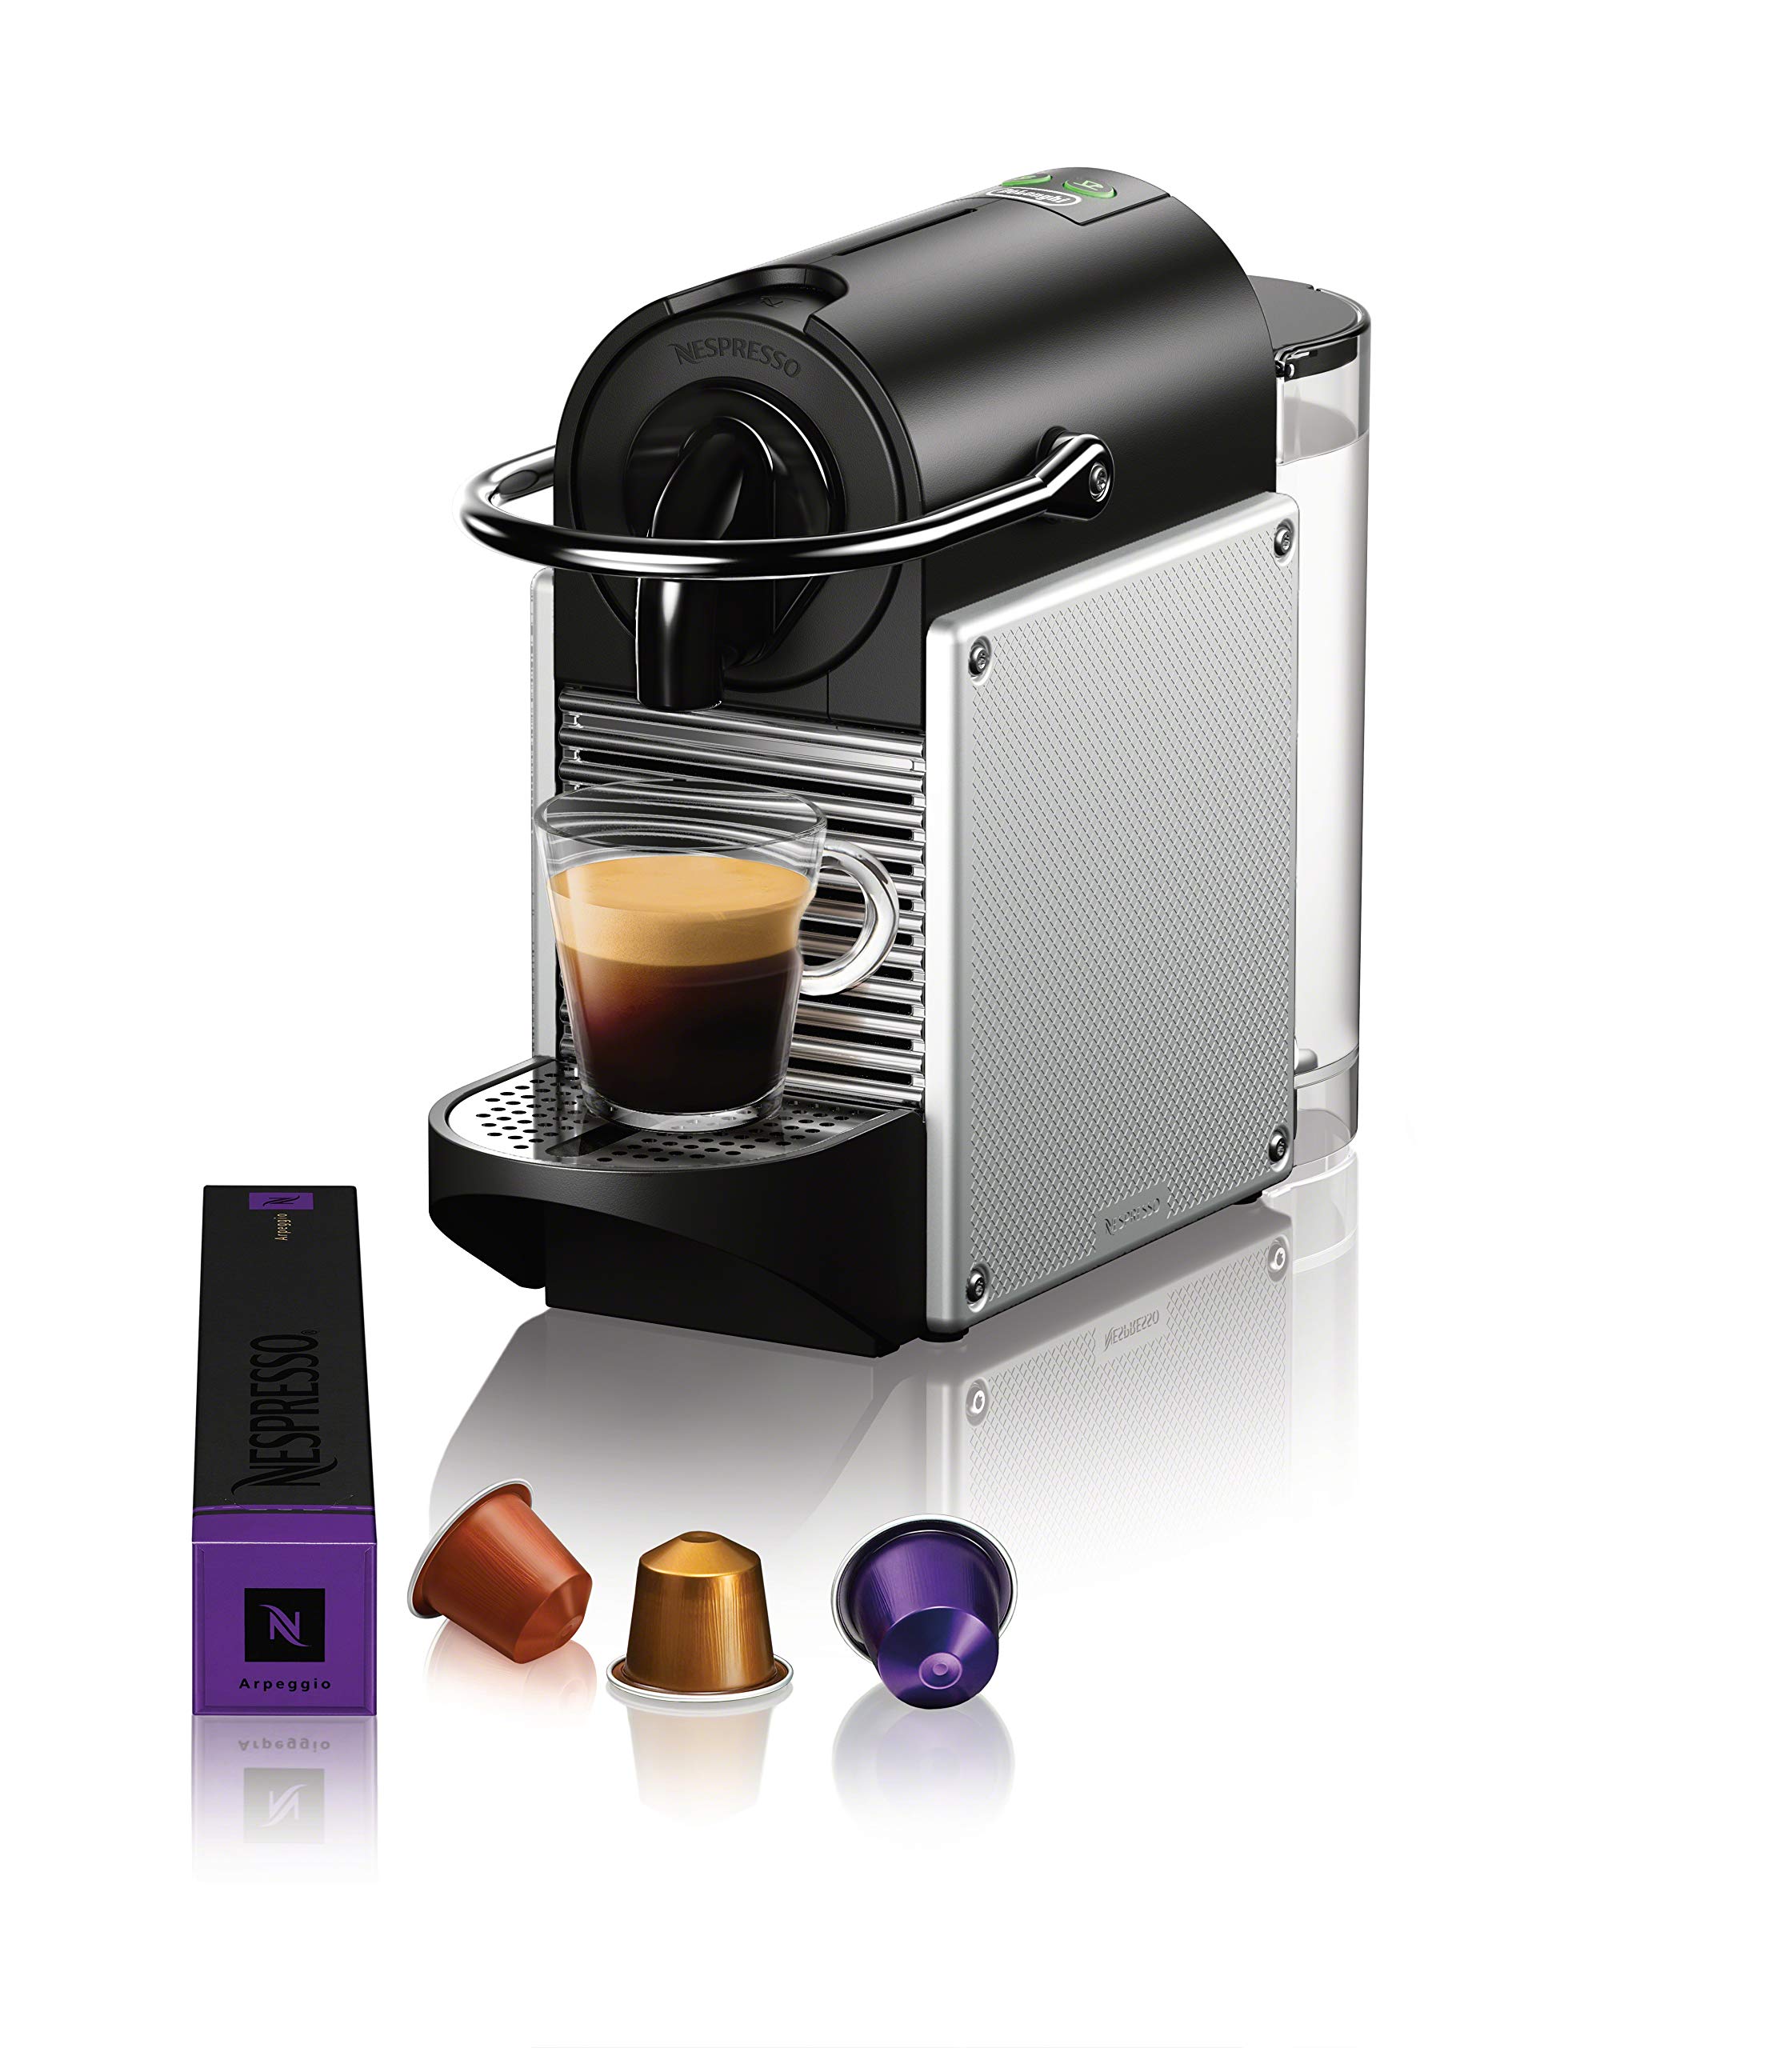 Nespresso by De'Longhi Pixie Single-Serve Espresso Machine with Simplified Water Tank in Aluminum and Aeroccino Milk Frother in Black - image 2 of 4